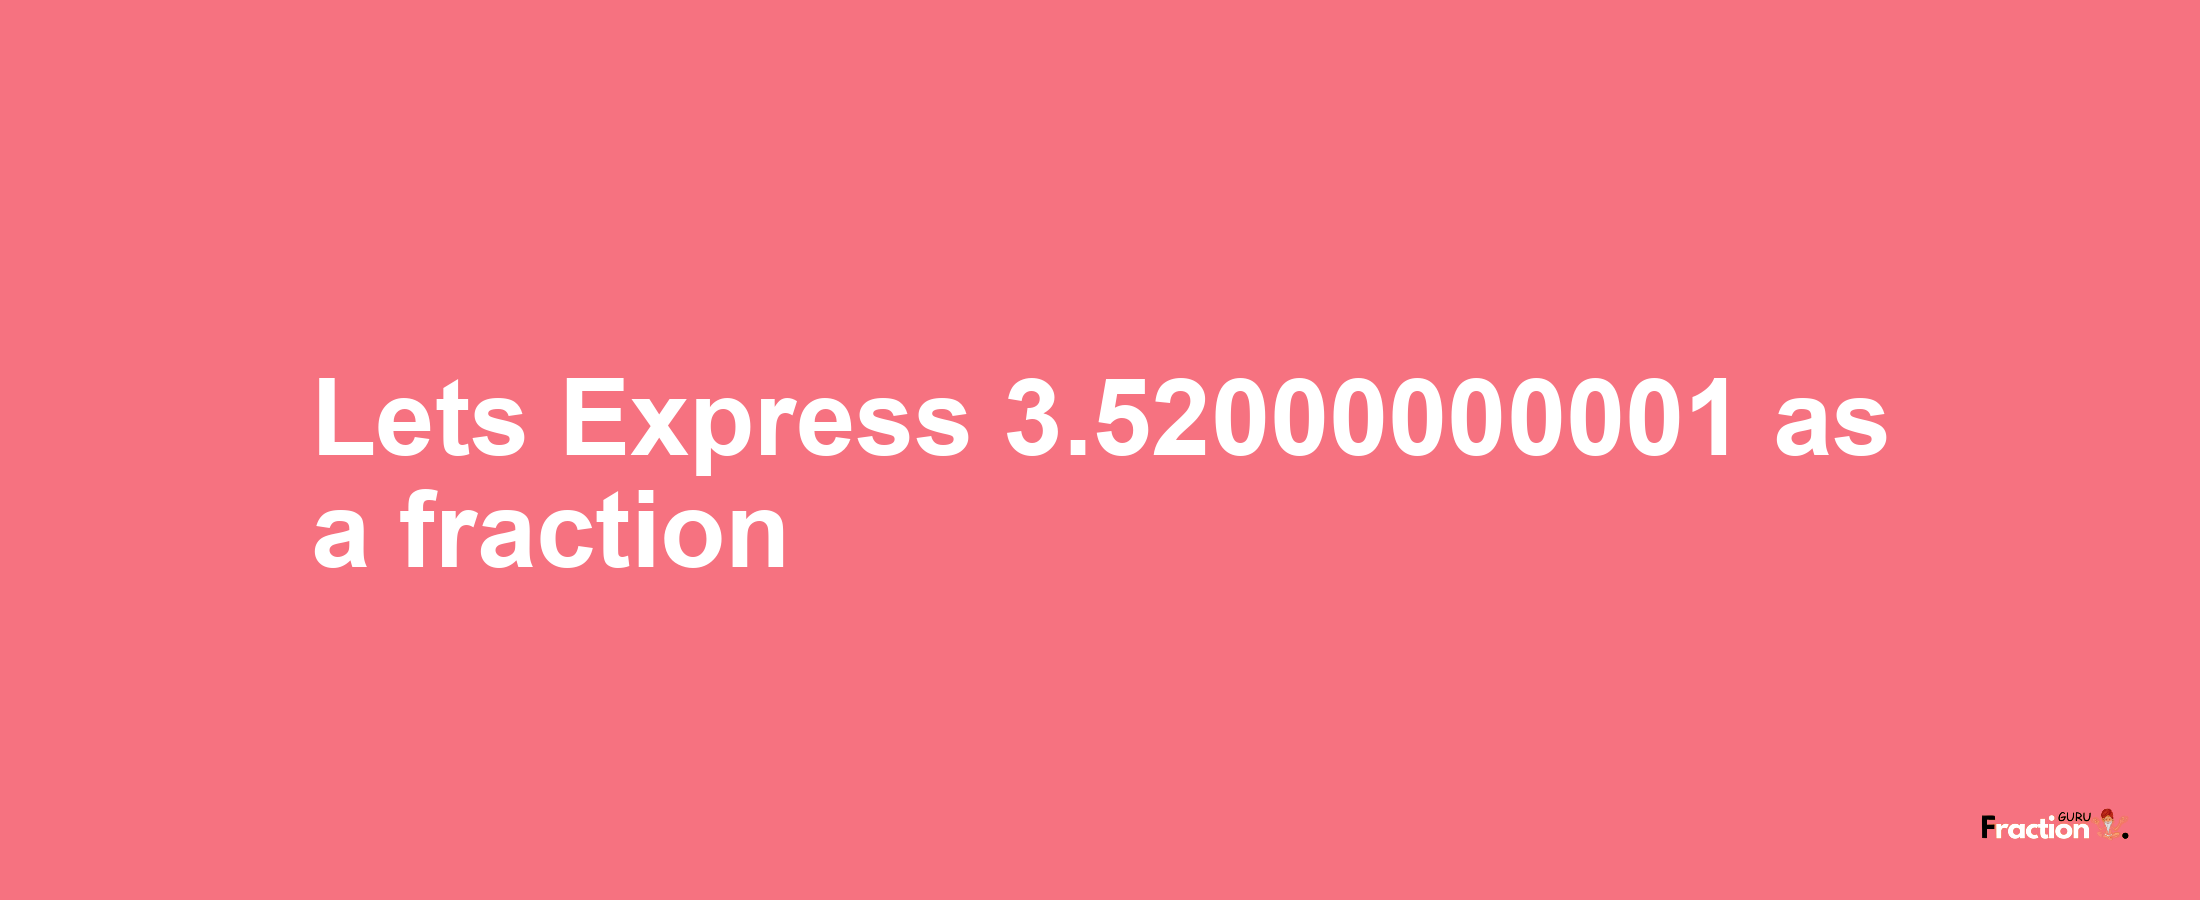 Lets Express 3.52000000001 as afraction